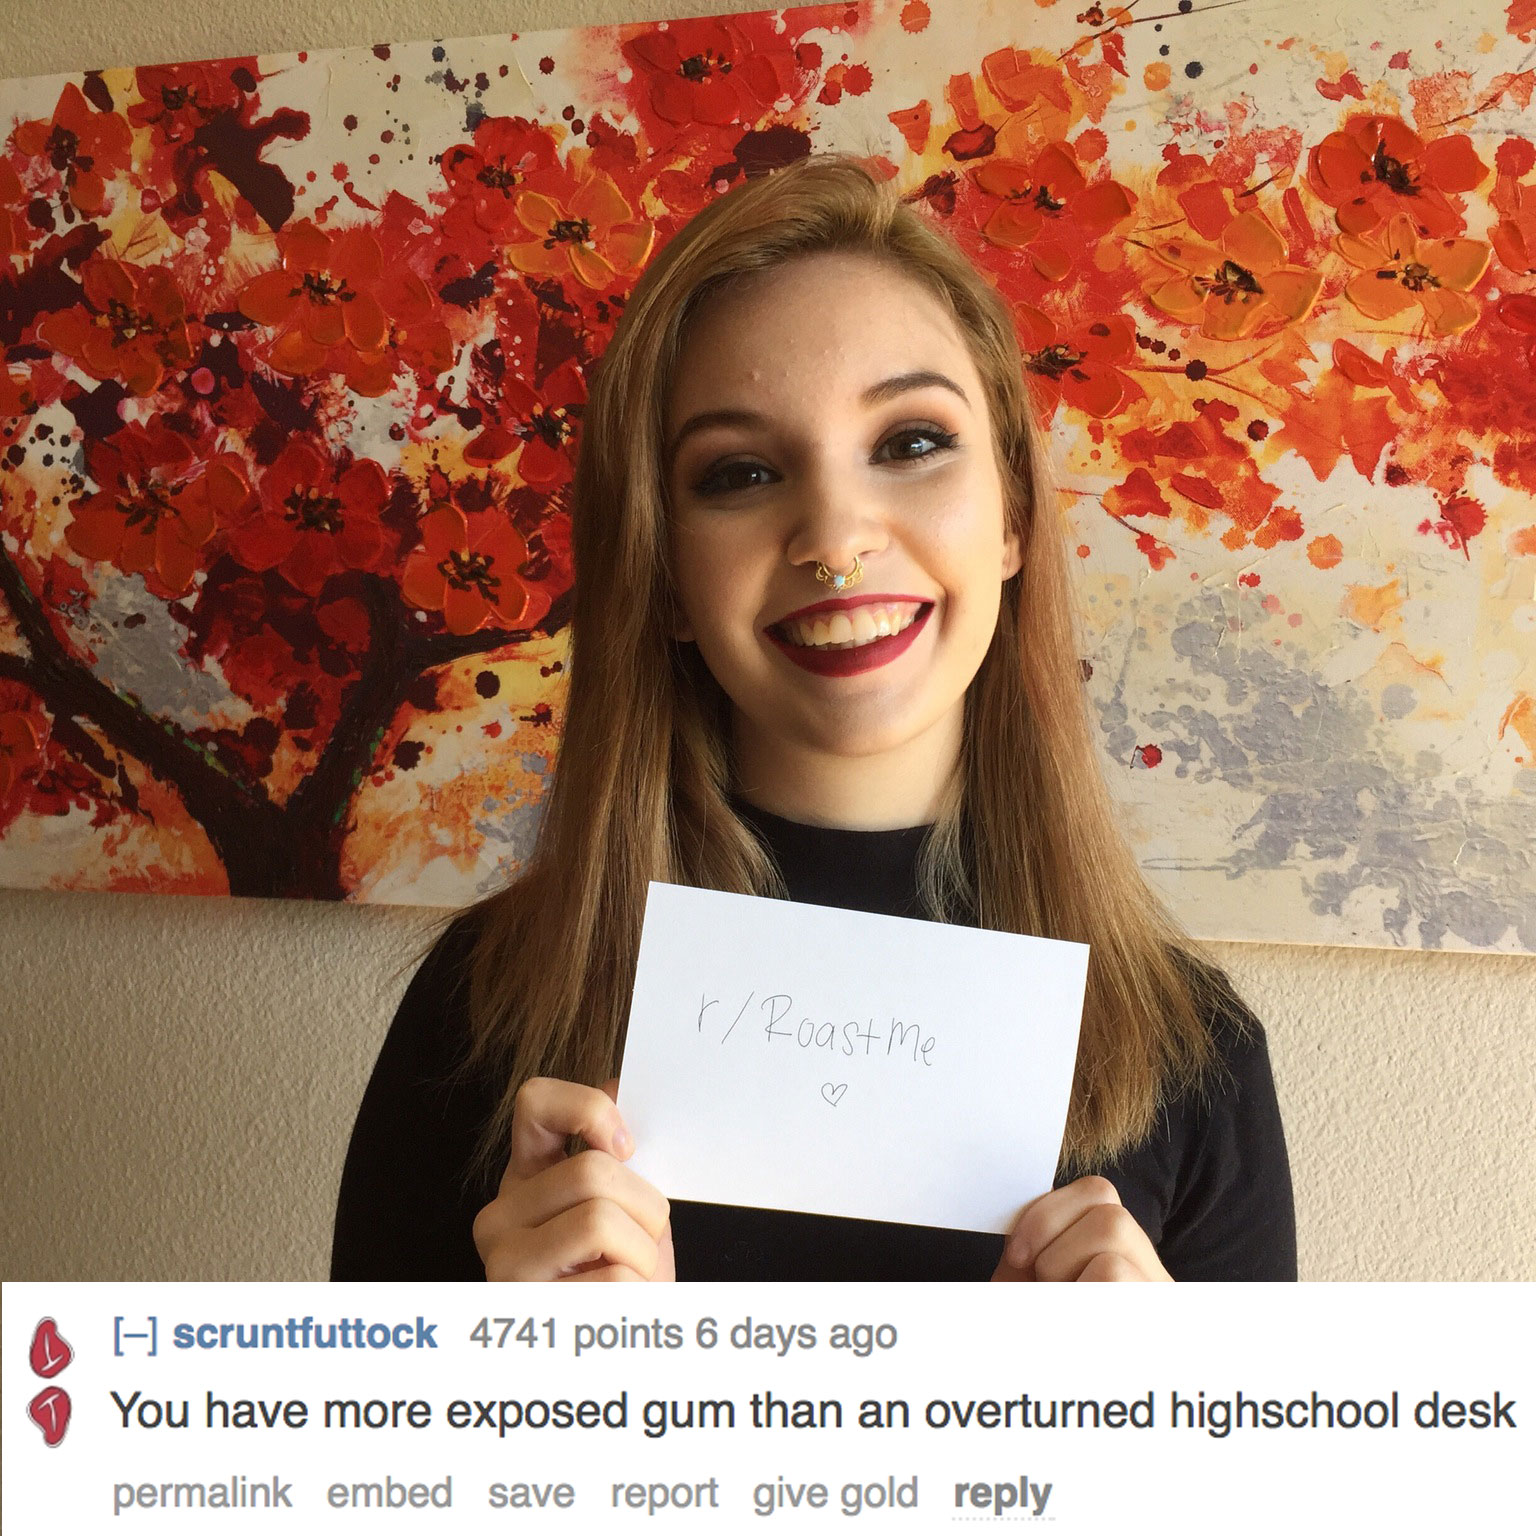 best high school roasts - rRoast me A scruntfuttock 4741 points 6 days ago You have more exposed gum than an overturned highschool desk permalink embed save report give gold